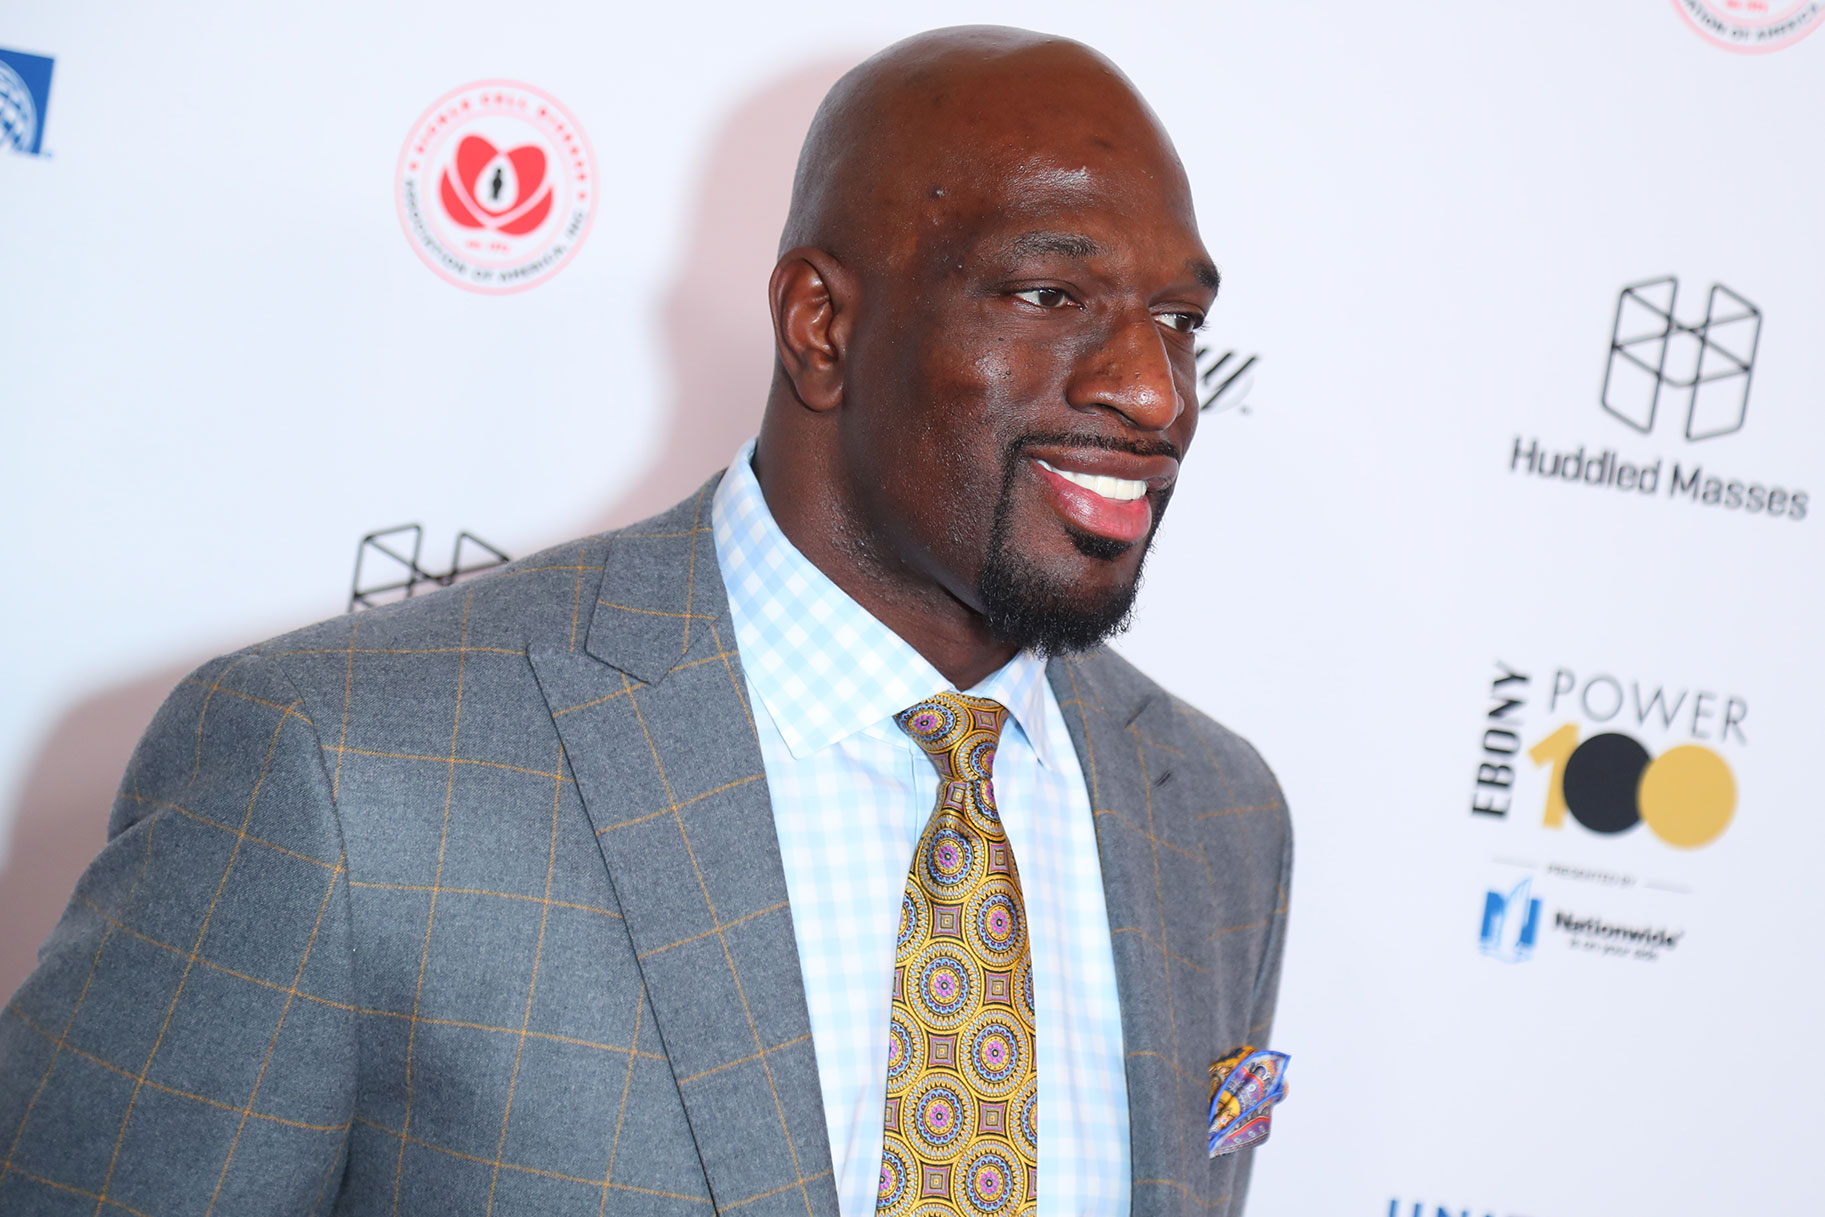 Titus O'Neil smiling on the red carpet